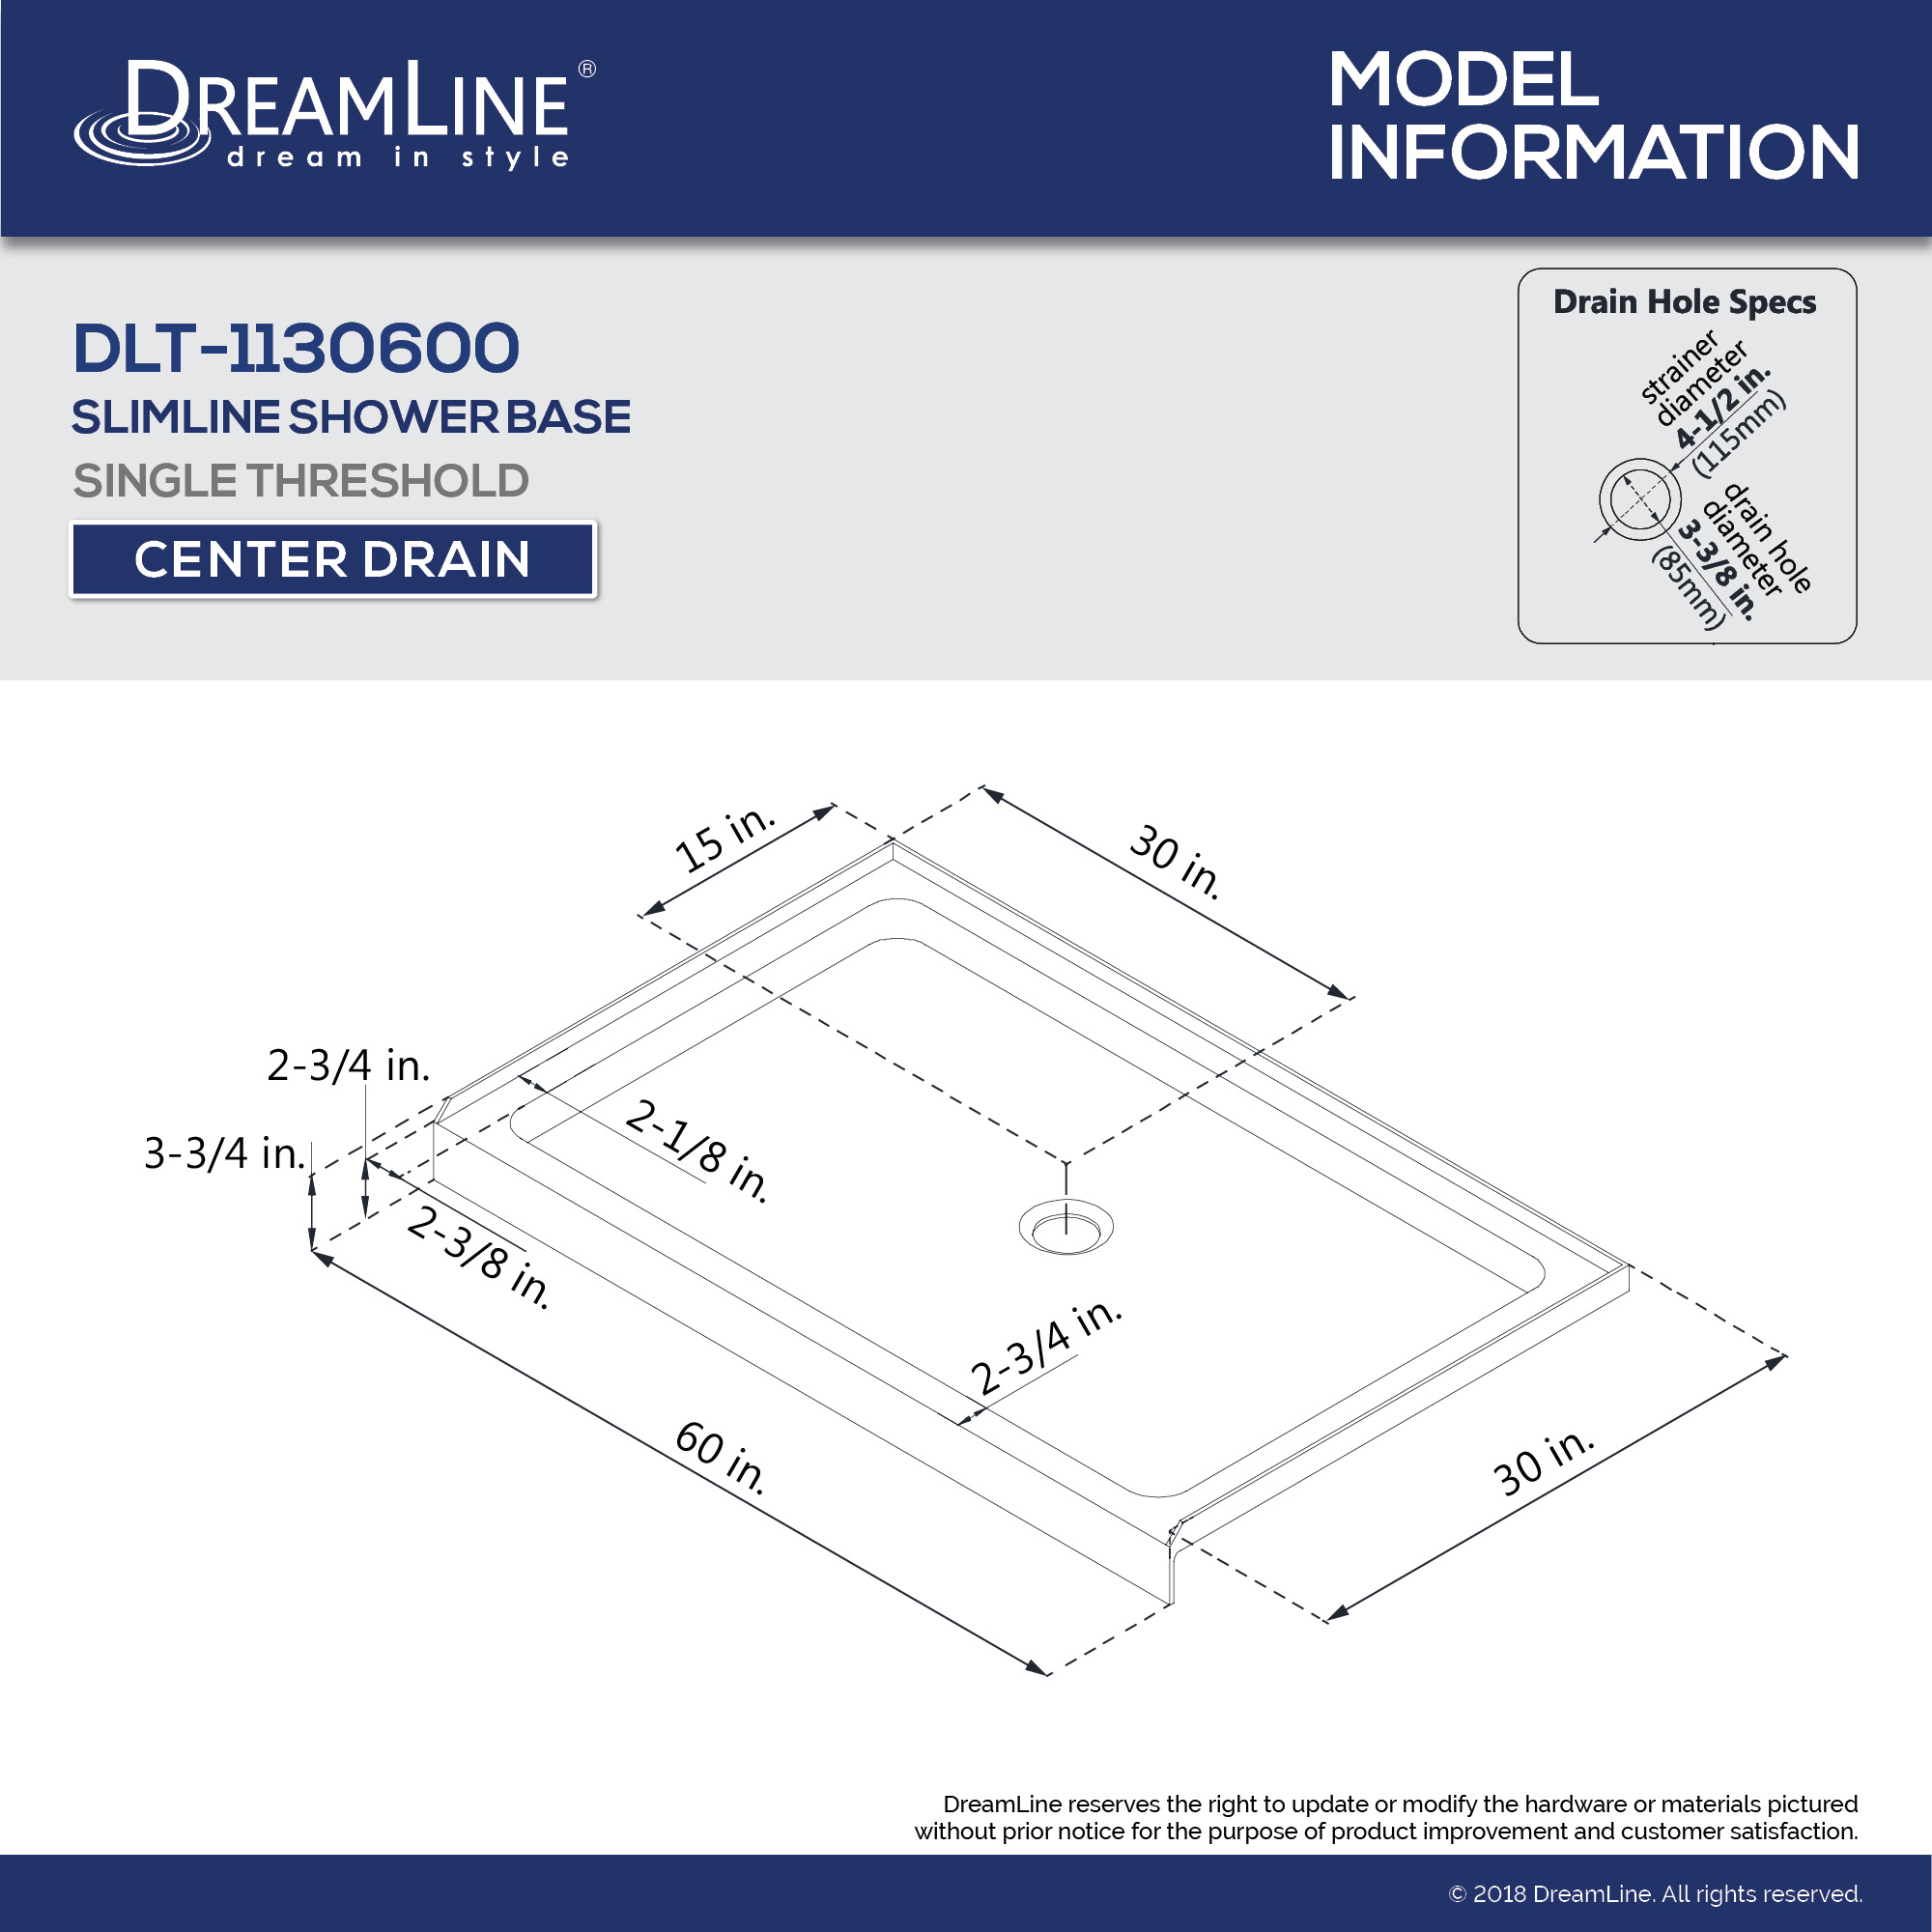 DreamLine Encore 30 in. D x 60 in. W x 78 3/4 in. H Bypass Shower Door in Brushed Nickel and Center Drain Biscuit Base Kit